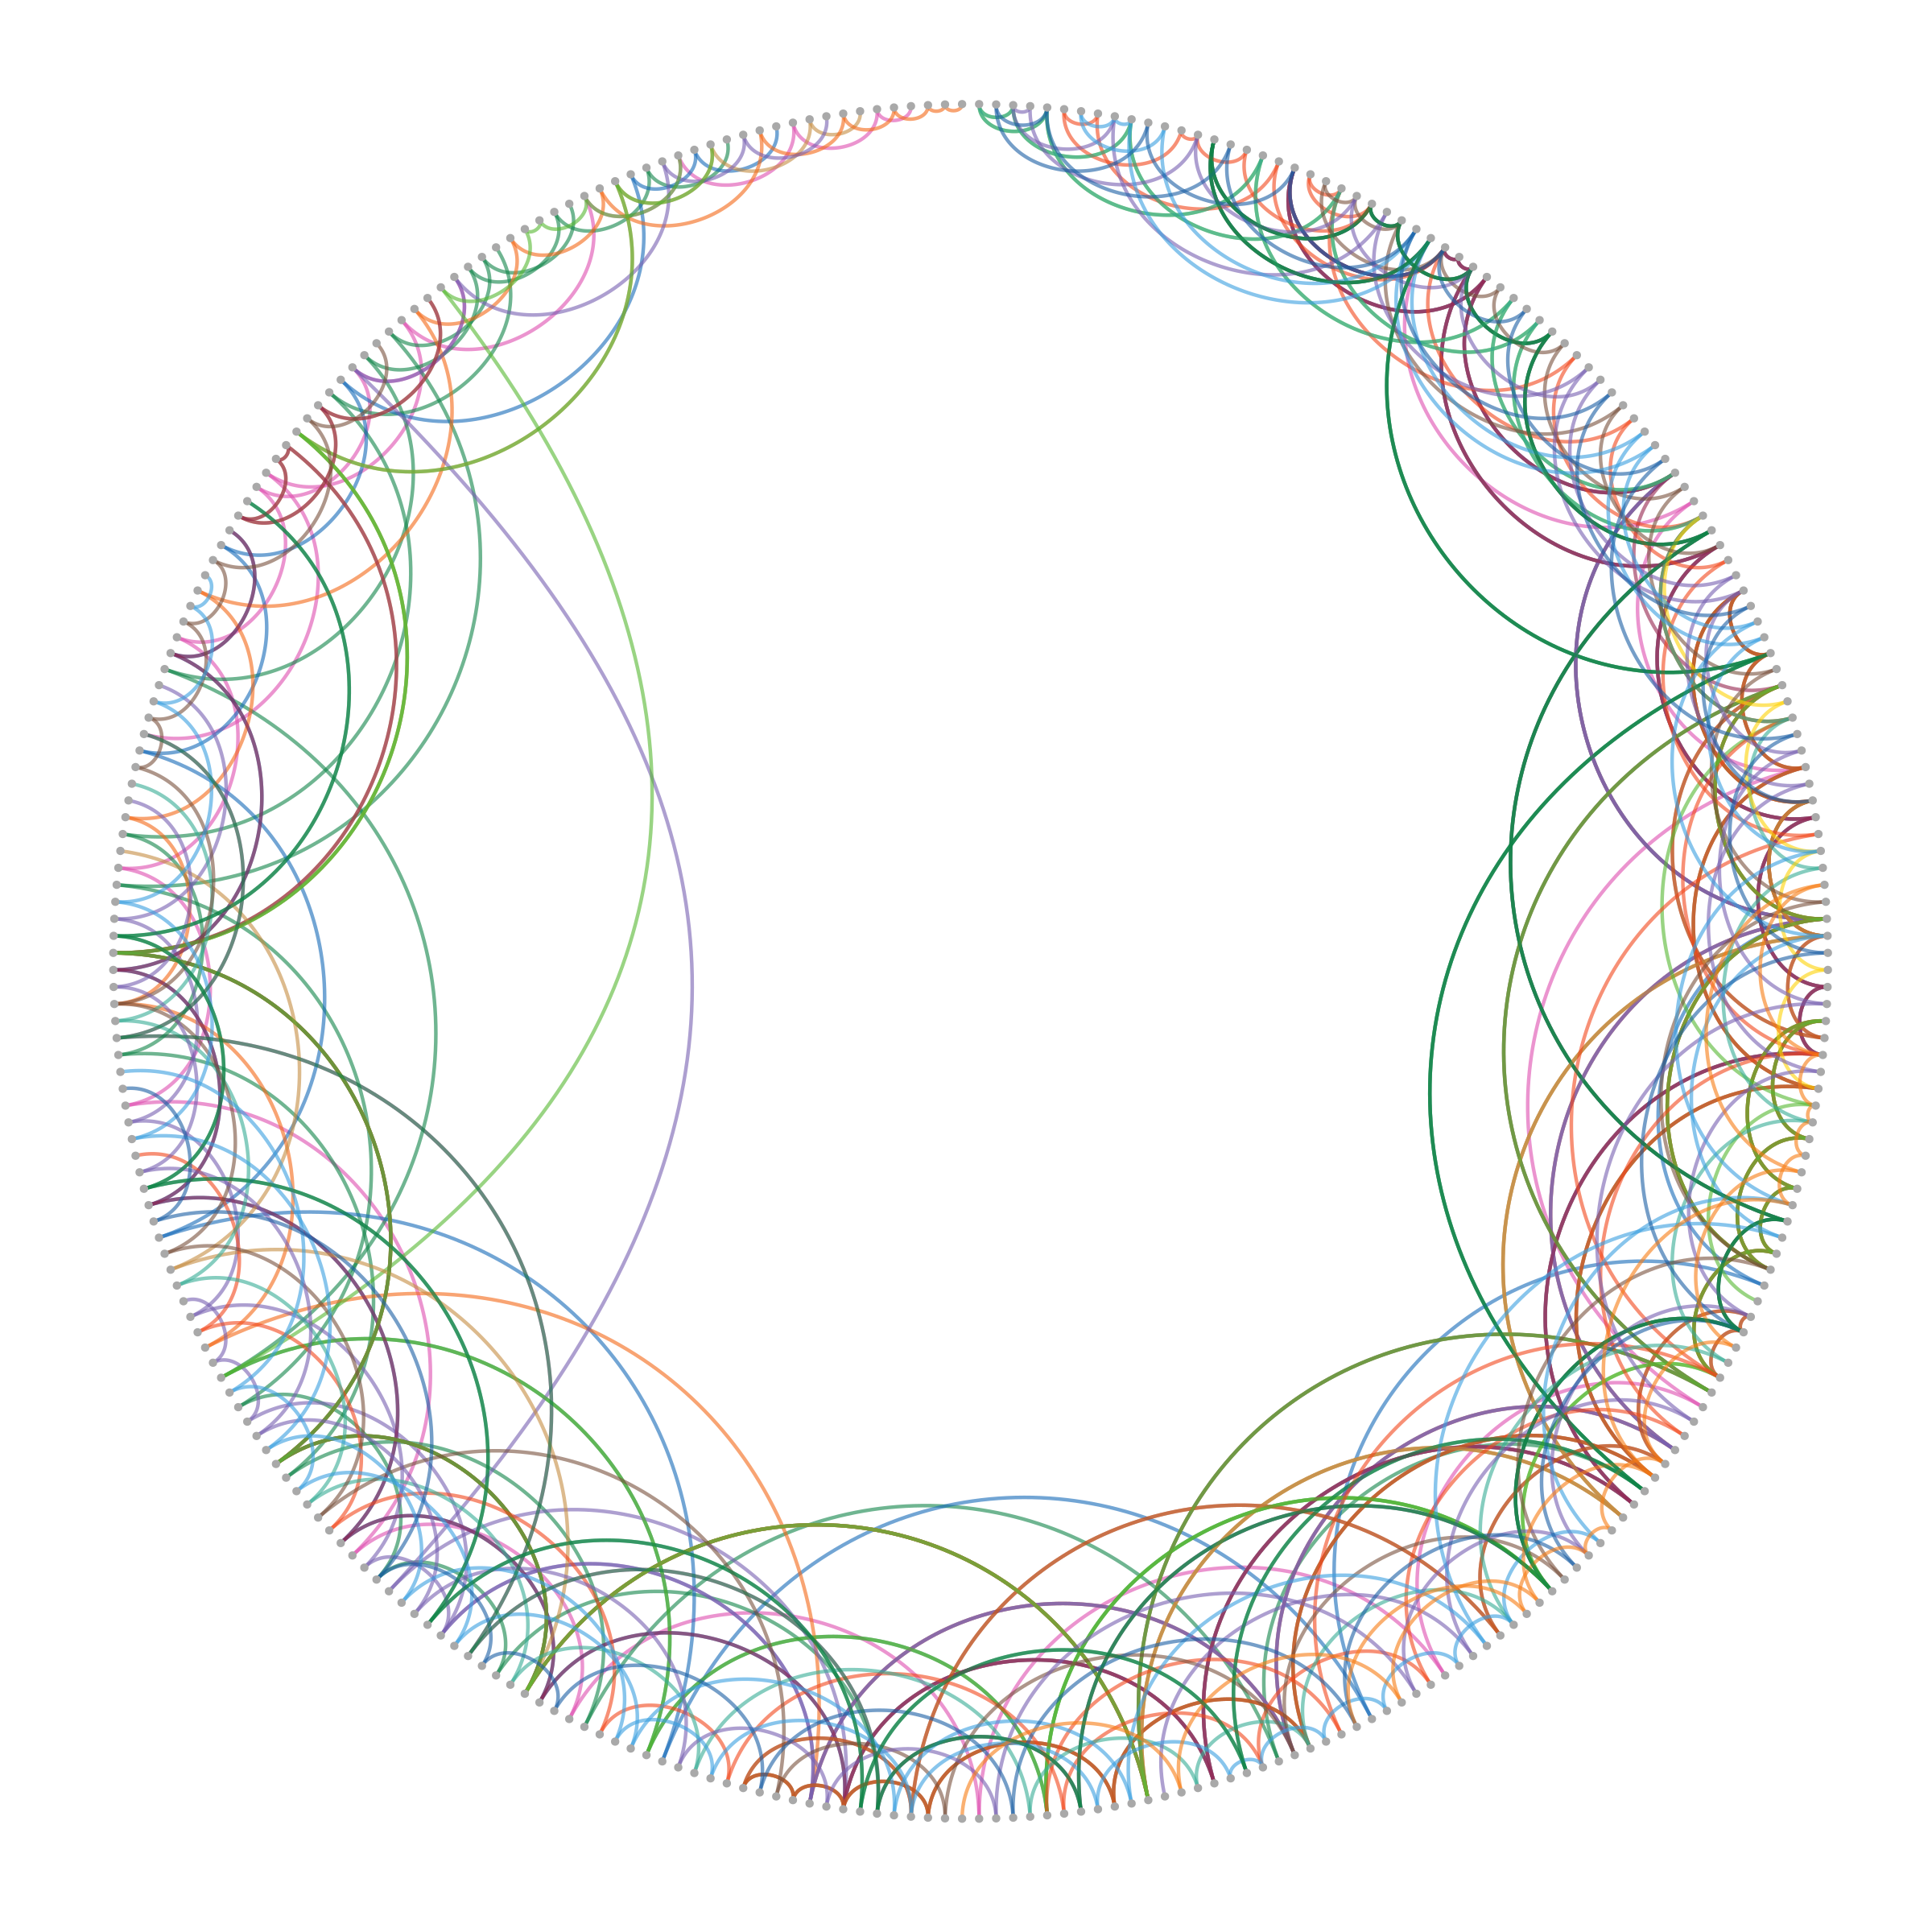 Berlin traffic network graph visualisation with geographical node order